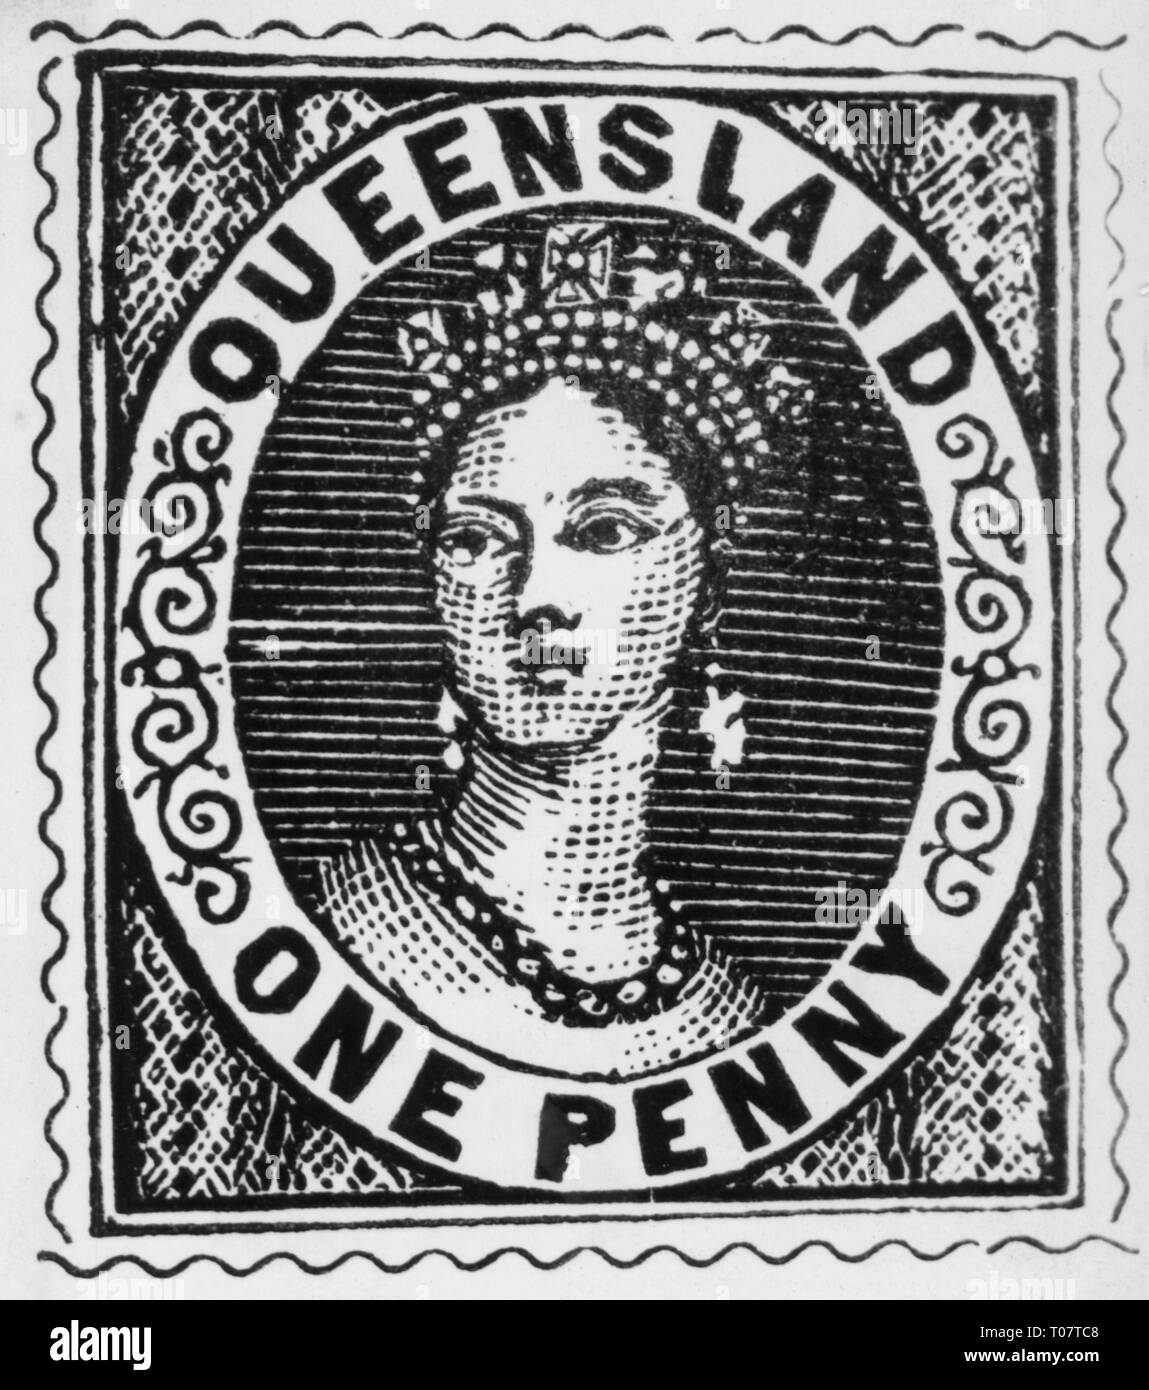 money / finances, taxes, revenue stamp, one penny, Queensland, Australia, 1860, Additional-Rights-Clearance-Info-Not-Available Stock Photo